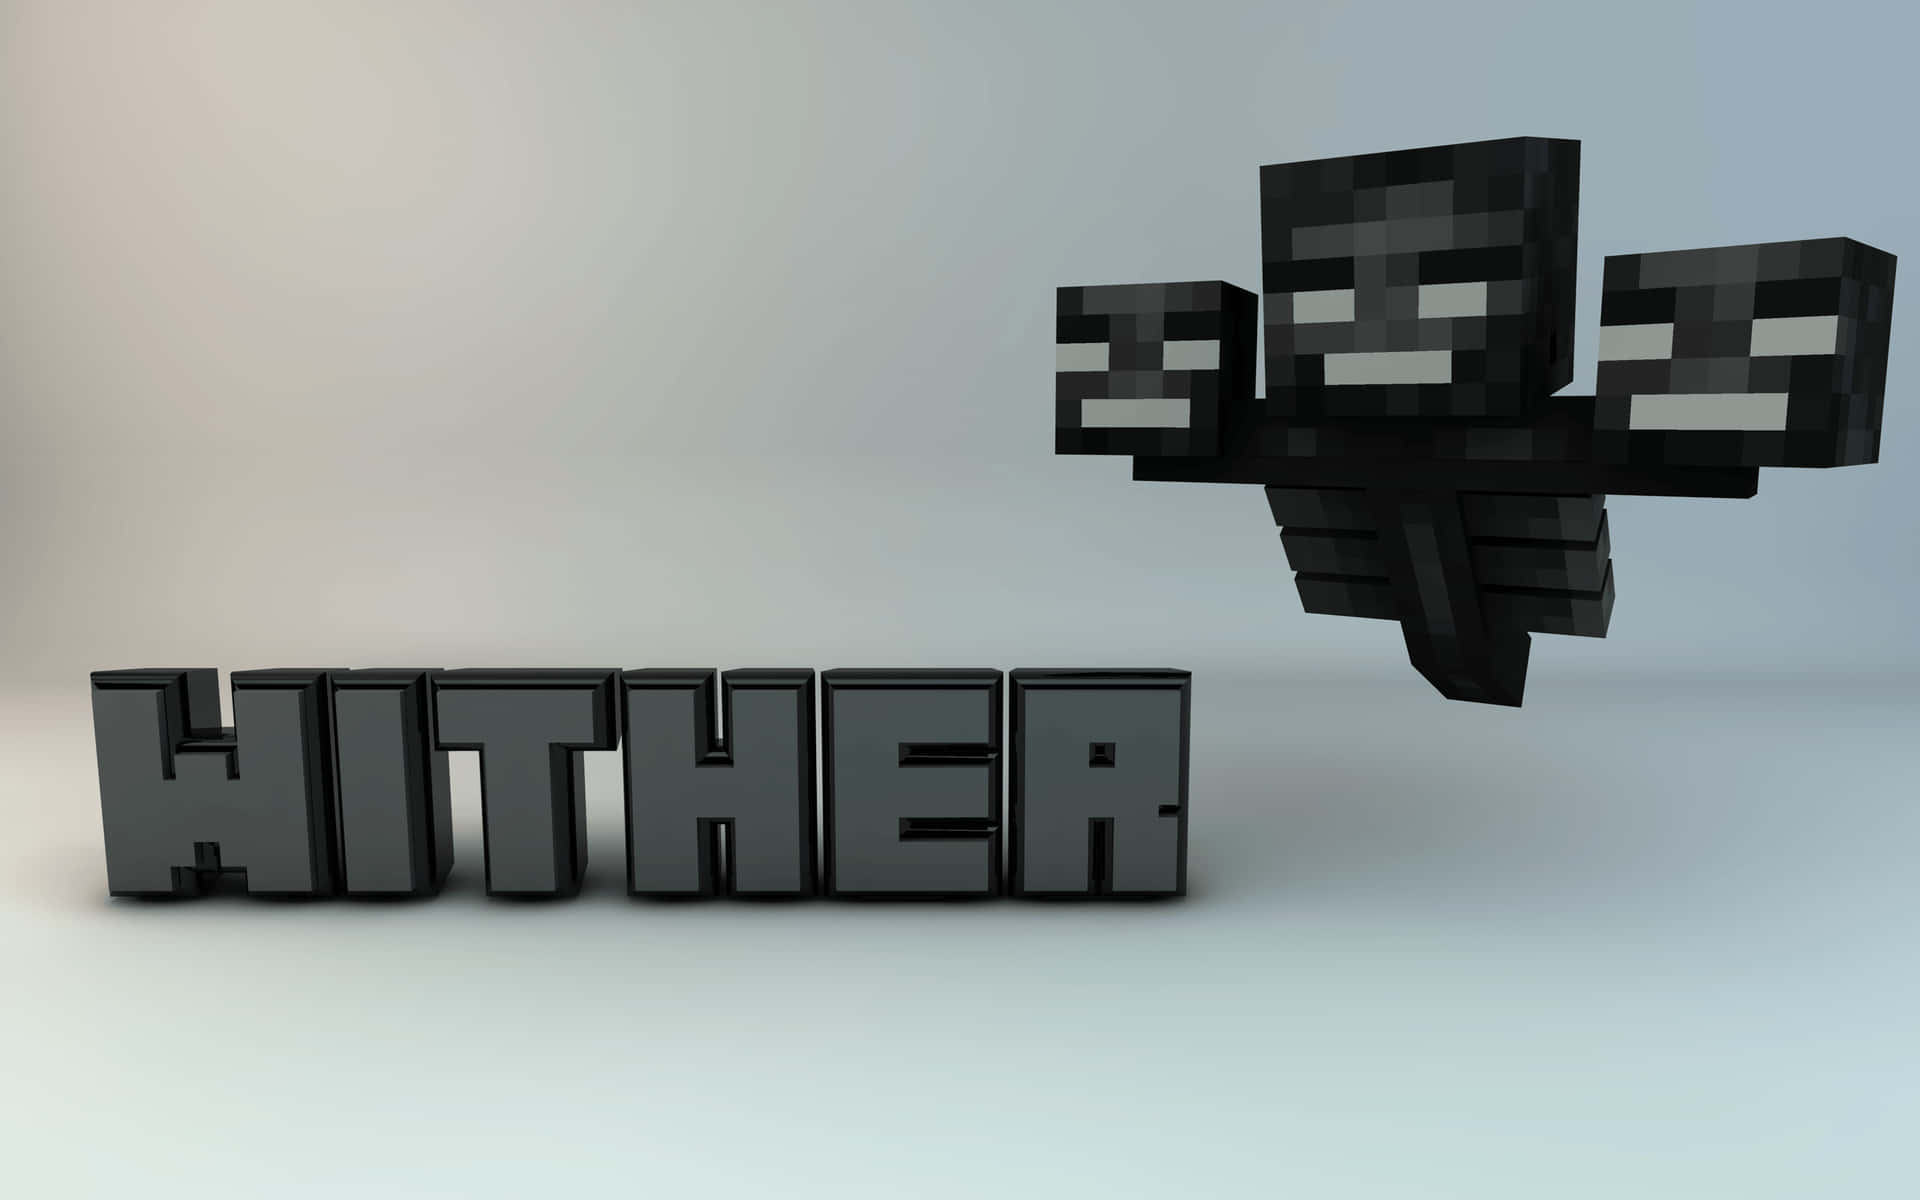 Intense battle with the formidable Minecraft Wither Boss Wallpaper